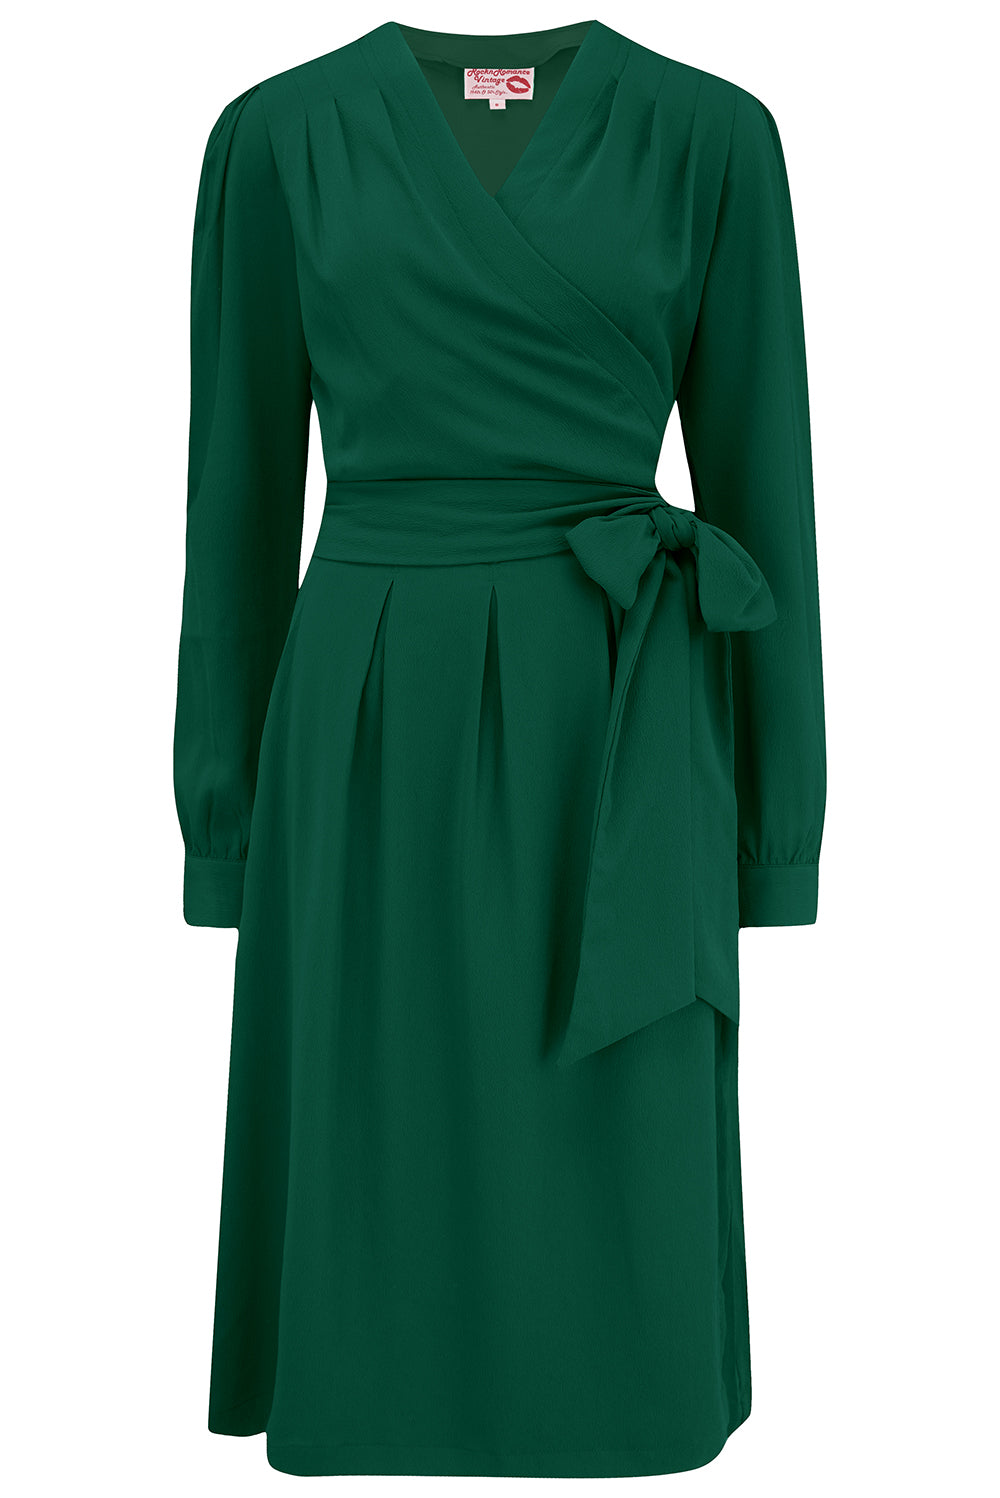 The "Evie" Long Sleeve Wrap Dress in Green, True & Authentic Late 1940s to Early 1950s Vintage Style - True and authentic vintage style clothing, inspired by the Classic styles of CC41 , WW2 and the fun 1950s RocknRoll era, for everyday wear plus events like Goodwood Revival, Twinwood Festival and Viva Las Vegas Rockabilly Weekend Rock n Romance Rock n Romance